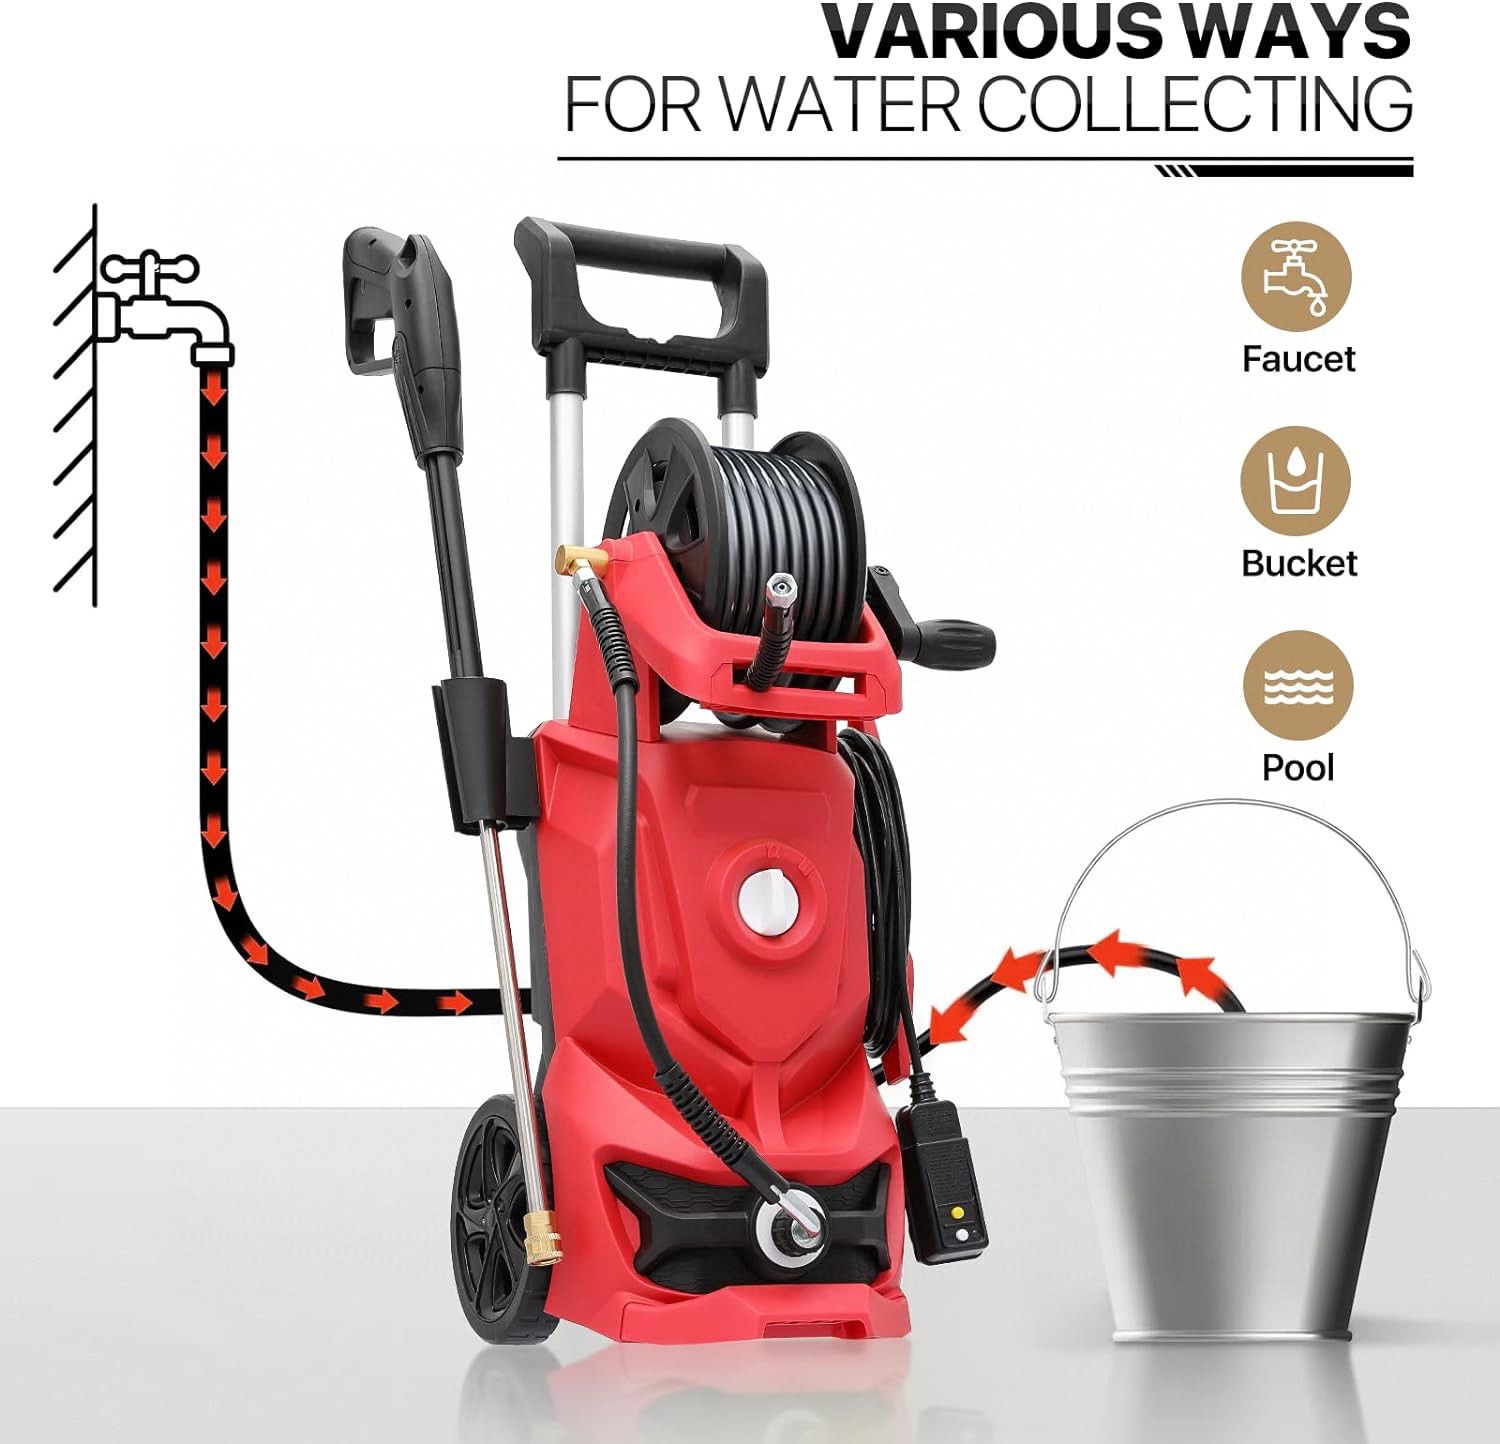 Electric Pressure Washers - Portable Power Washer for Driveways with Foam Tank, Quick-Connect Nozzles, Cable, and Hose Included, Red